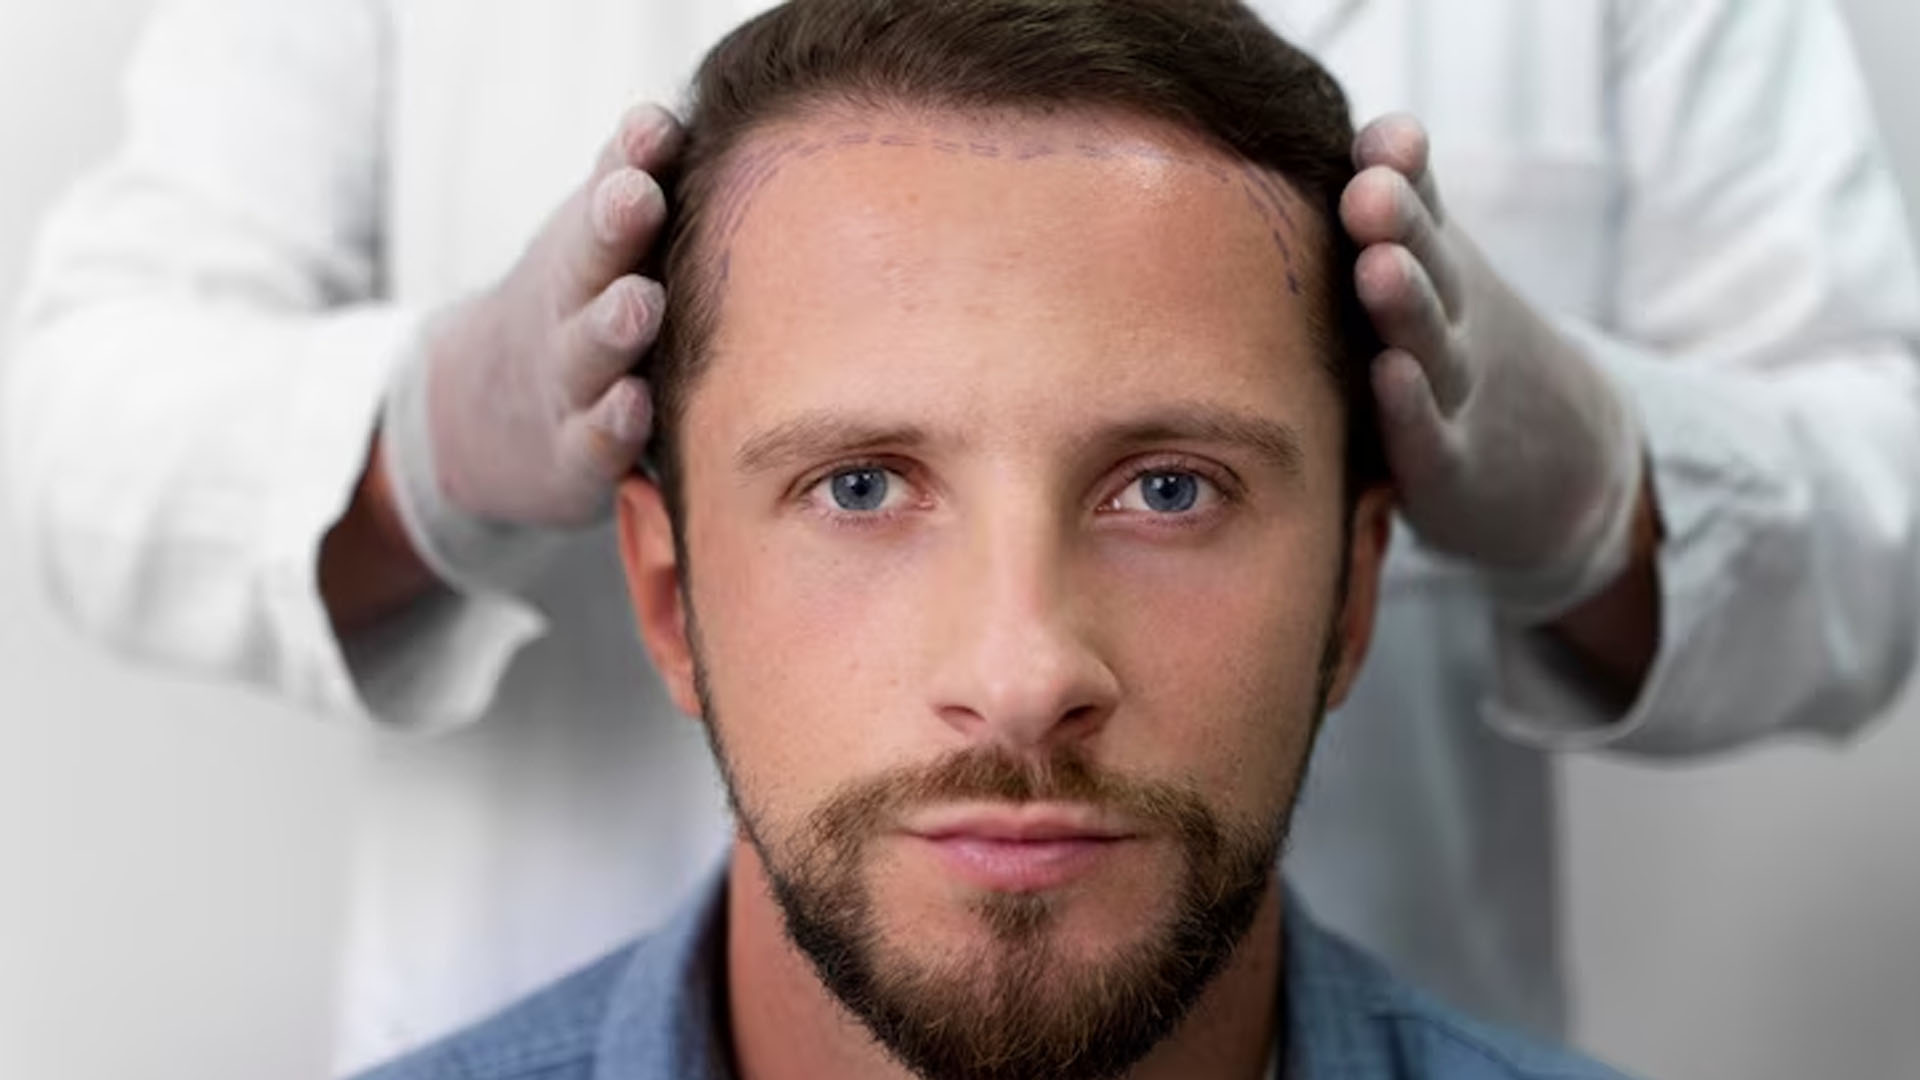 What are the Home Remedies for Baldness?